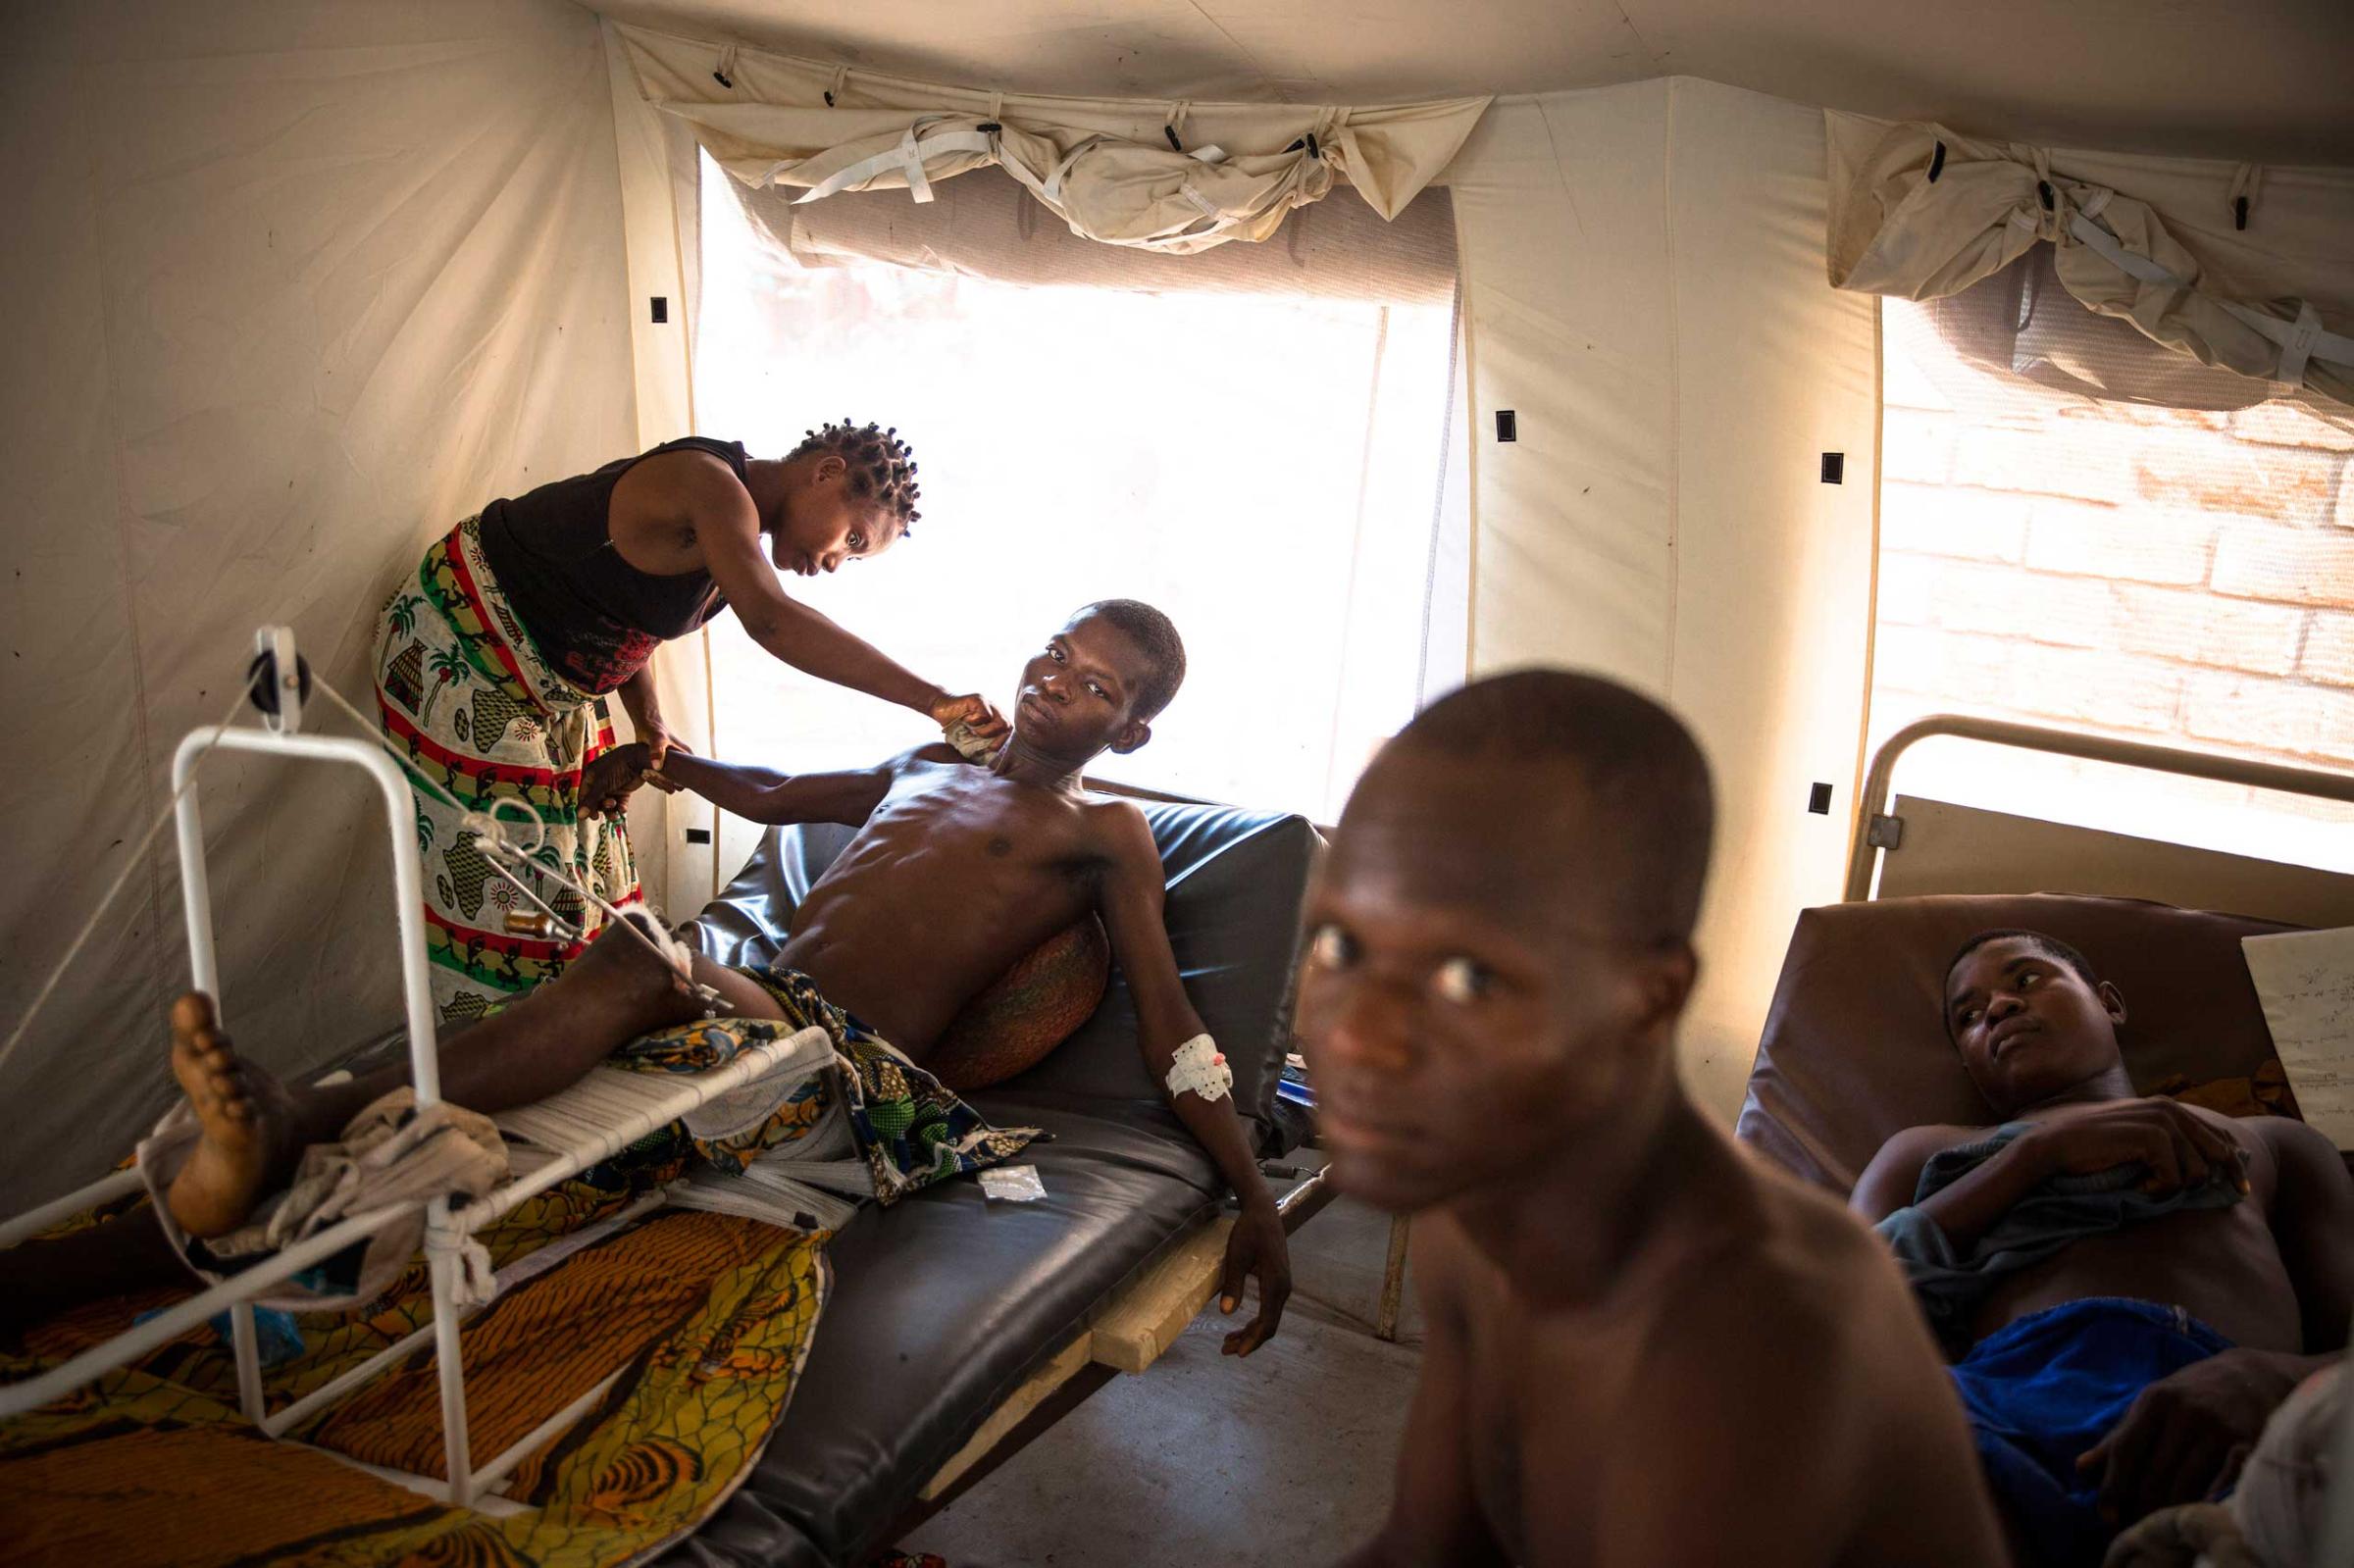 Jan. 31, 2014: A man wounded during previous days of fighting between Christians and Muslims is washed by his wife in a tent in Bangui's community hospital.